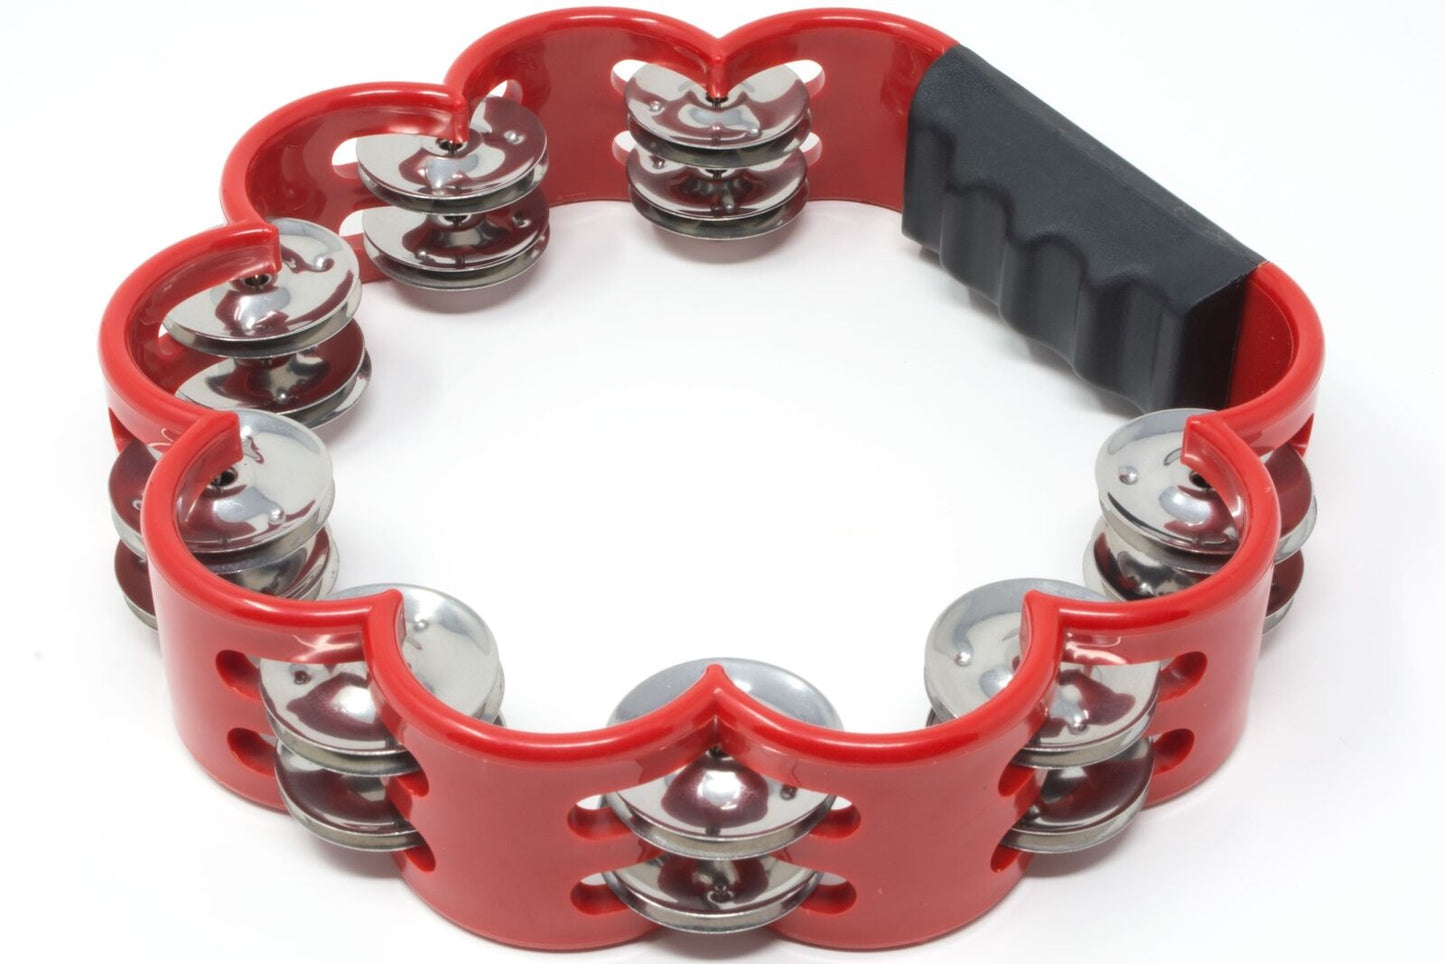 Tone Deaf Music Star or Flower Shaped Tambourine in Red. Hand Held Percussion. Musical instrument Shaker Drum